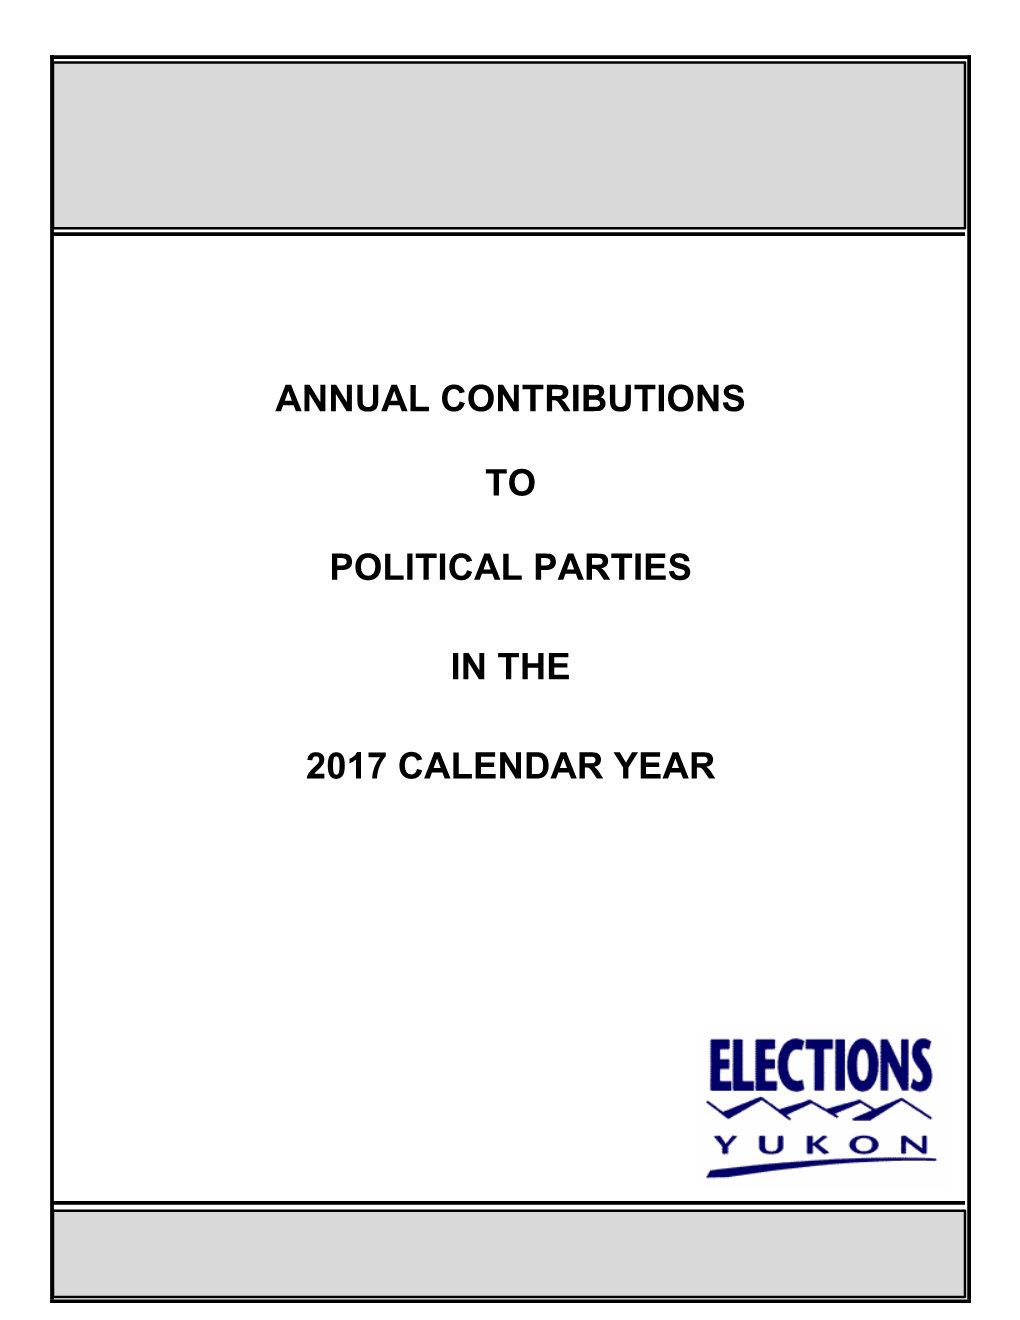 Annual Contributions to Political Parties in the 2017